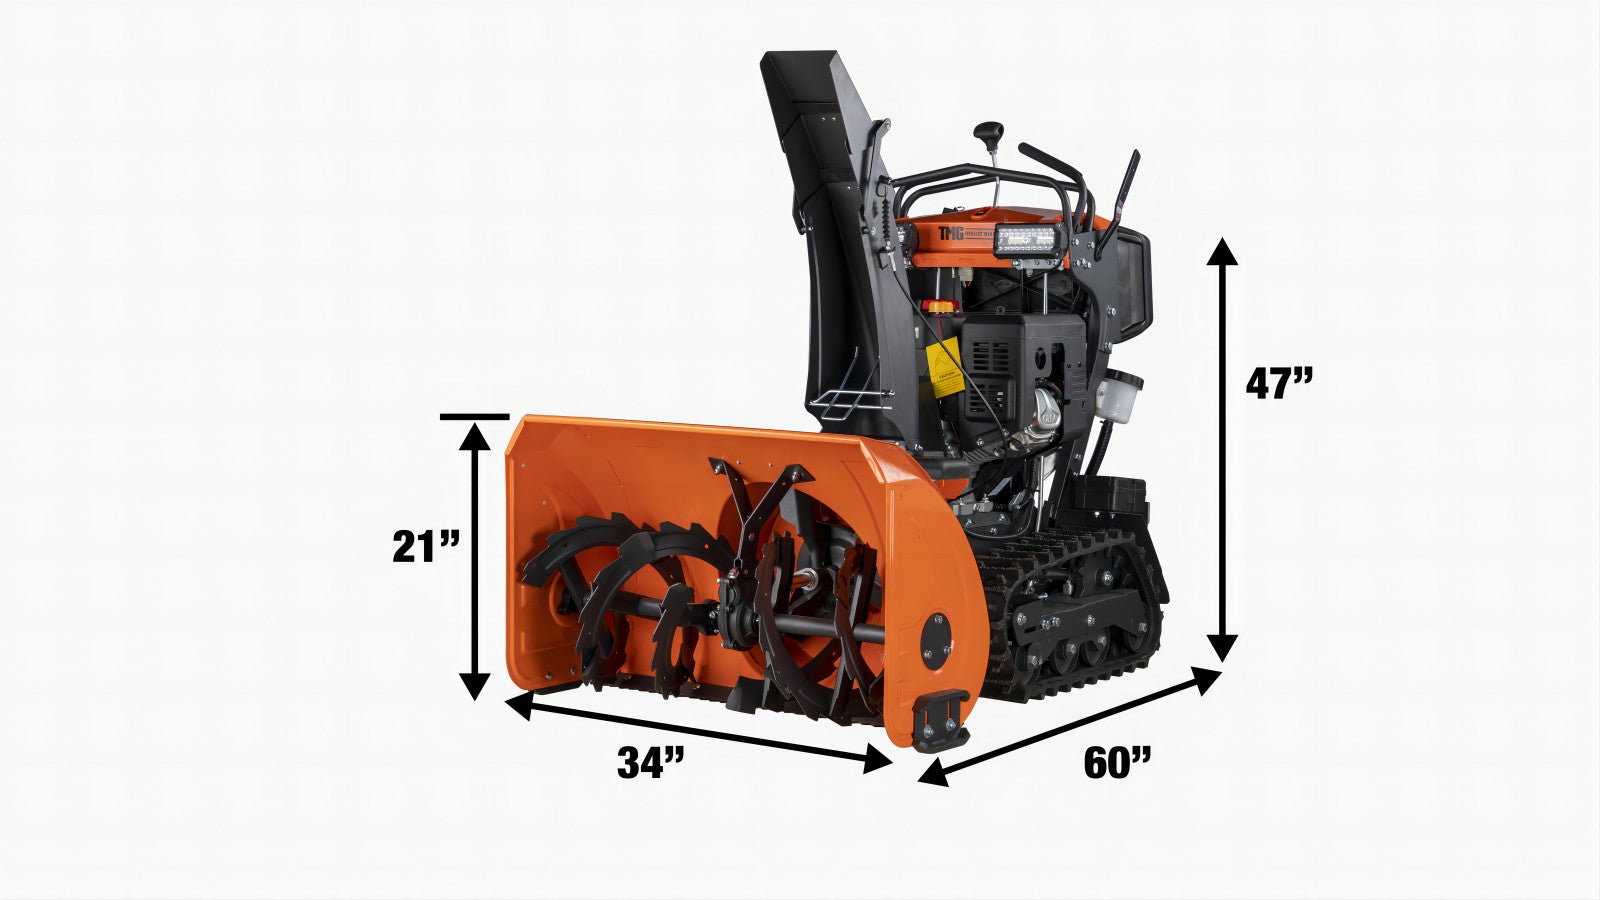 TMG Industrial 34” Stand-On Gas-Powered Snow Blower, Dual Stage, Rubber Track, LED Light, 50’ Throwing Distance, TMG-GSB36-specifications-image